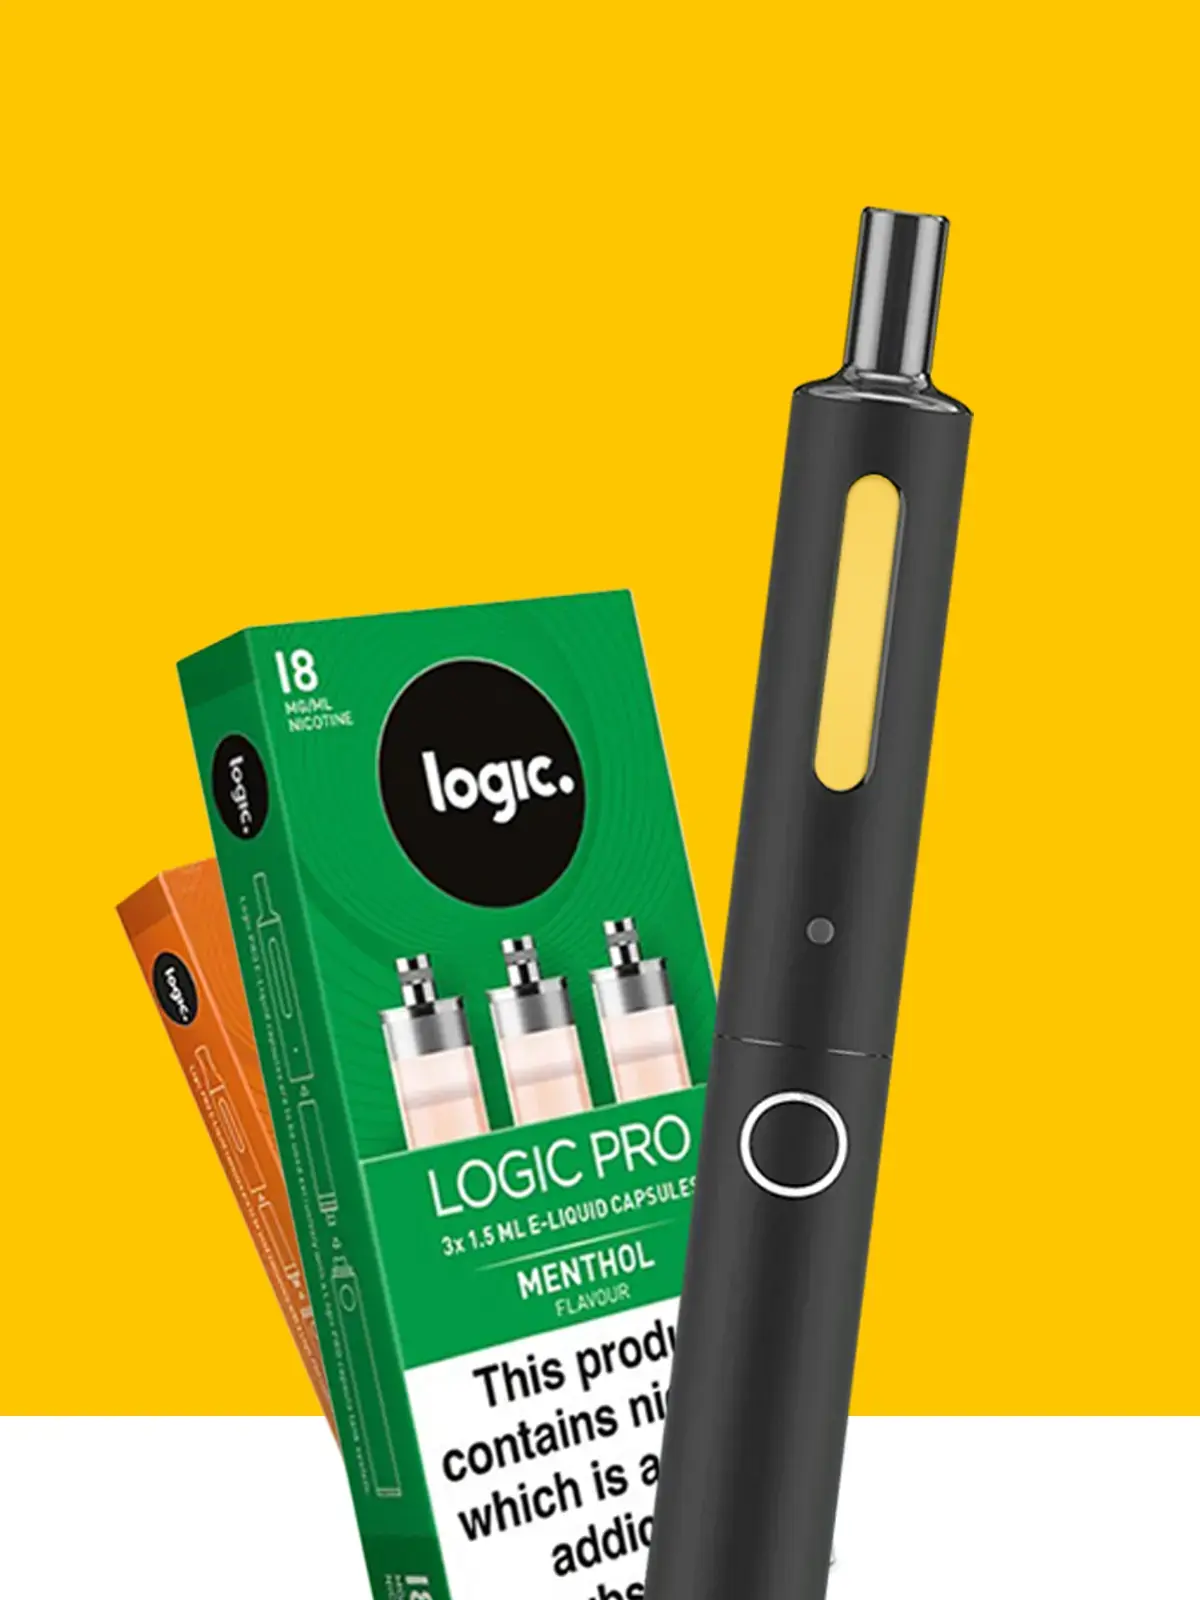 Logic Pro device and two packs of Logic Pro refills in front of a yellow background